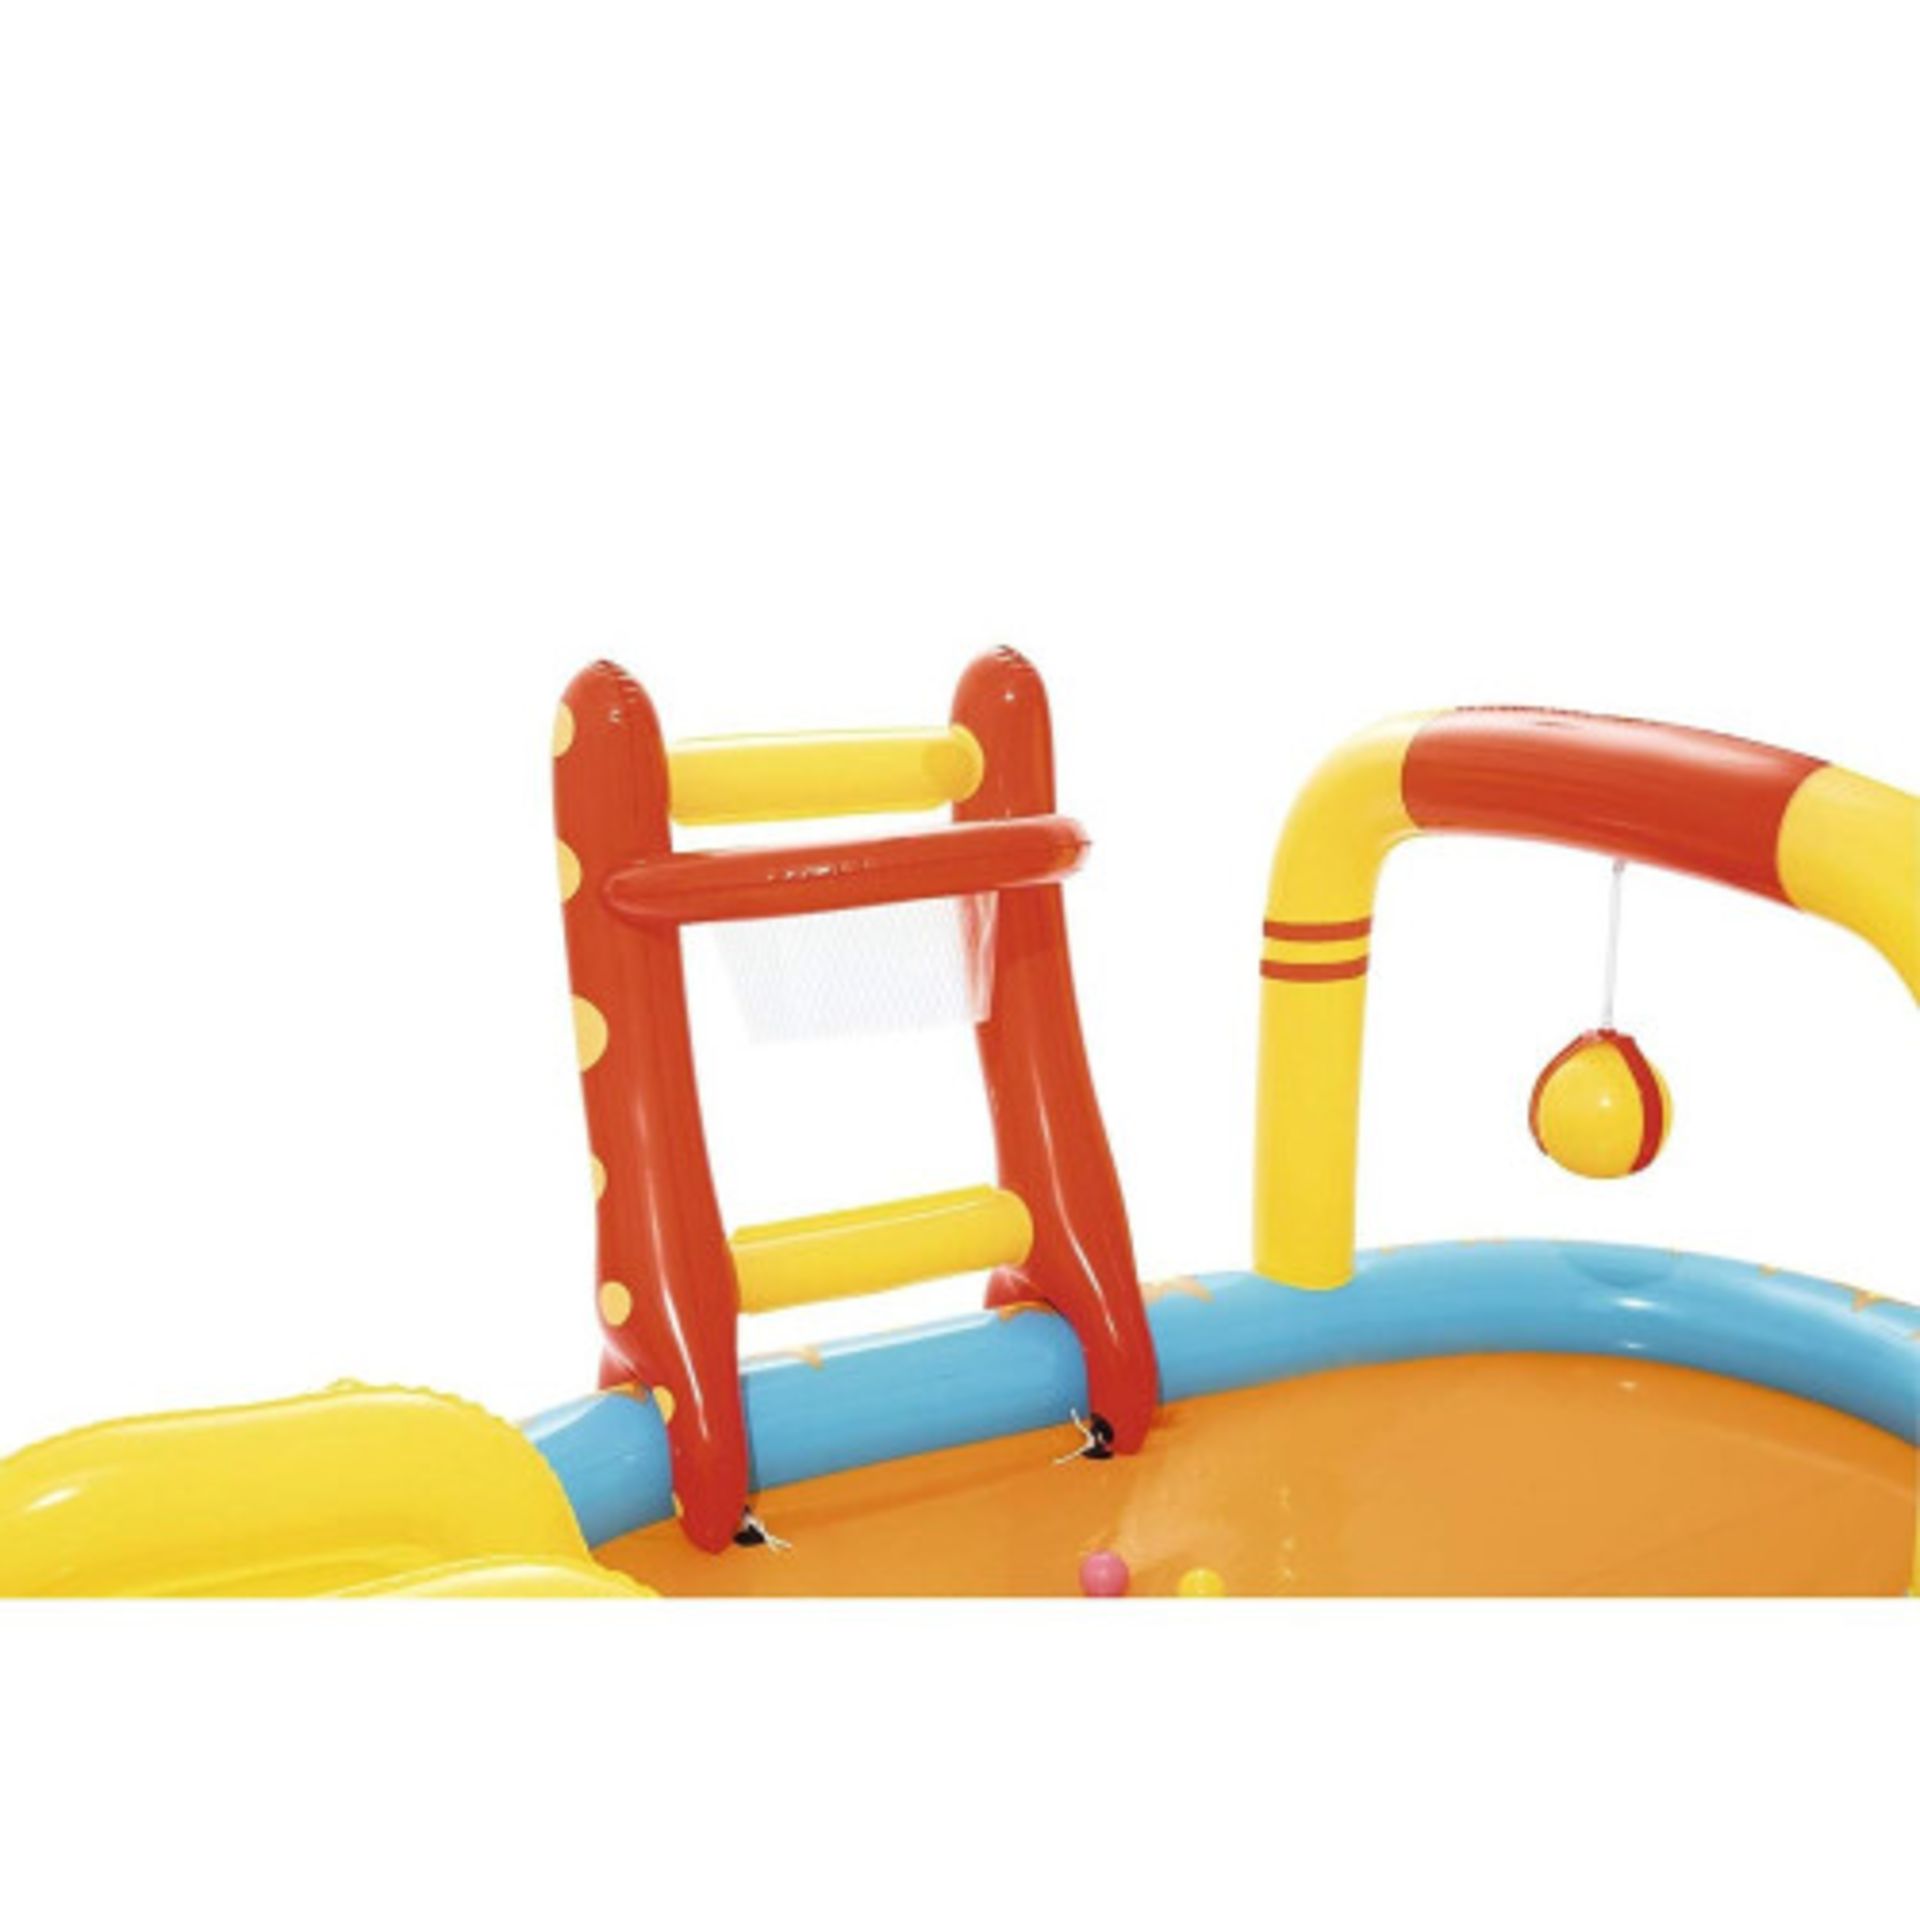 2 X BRAND NEW BESTWAY LIL CHAMP POOL PLAY CENTRE - INCLUDES POOL / SLIDE / 6 BOWLING PINS / - Image 2 of 2